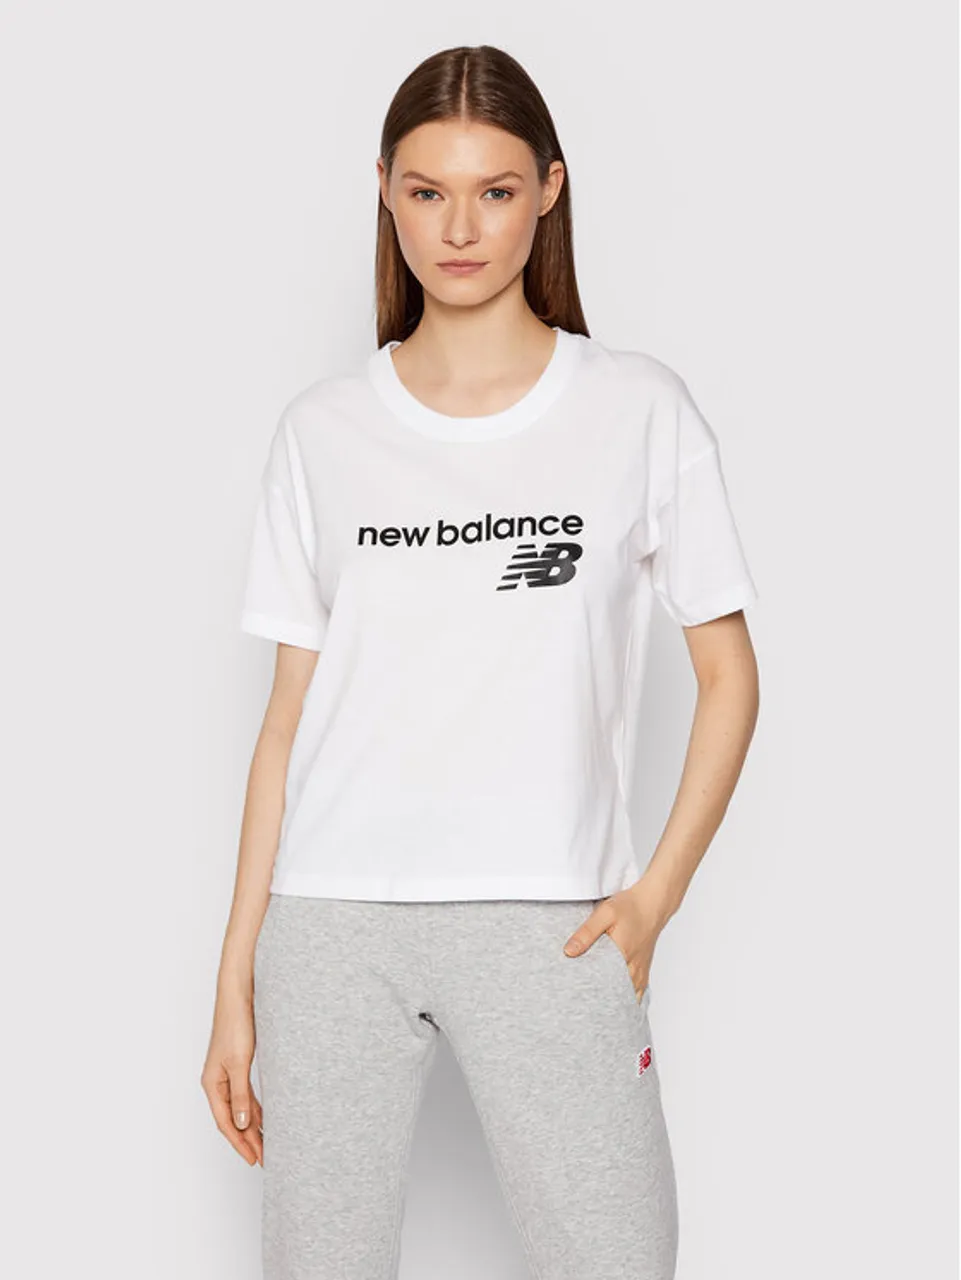 New Balance T-Shirt WT03805 Weiß Relaxed Fit